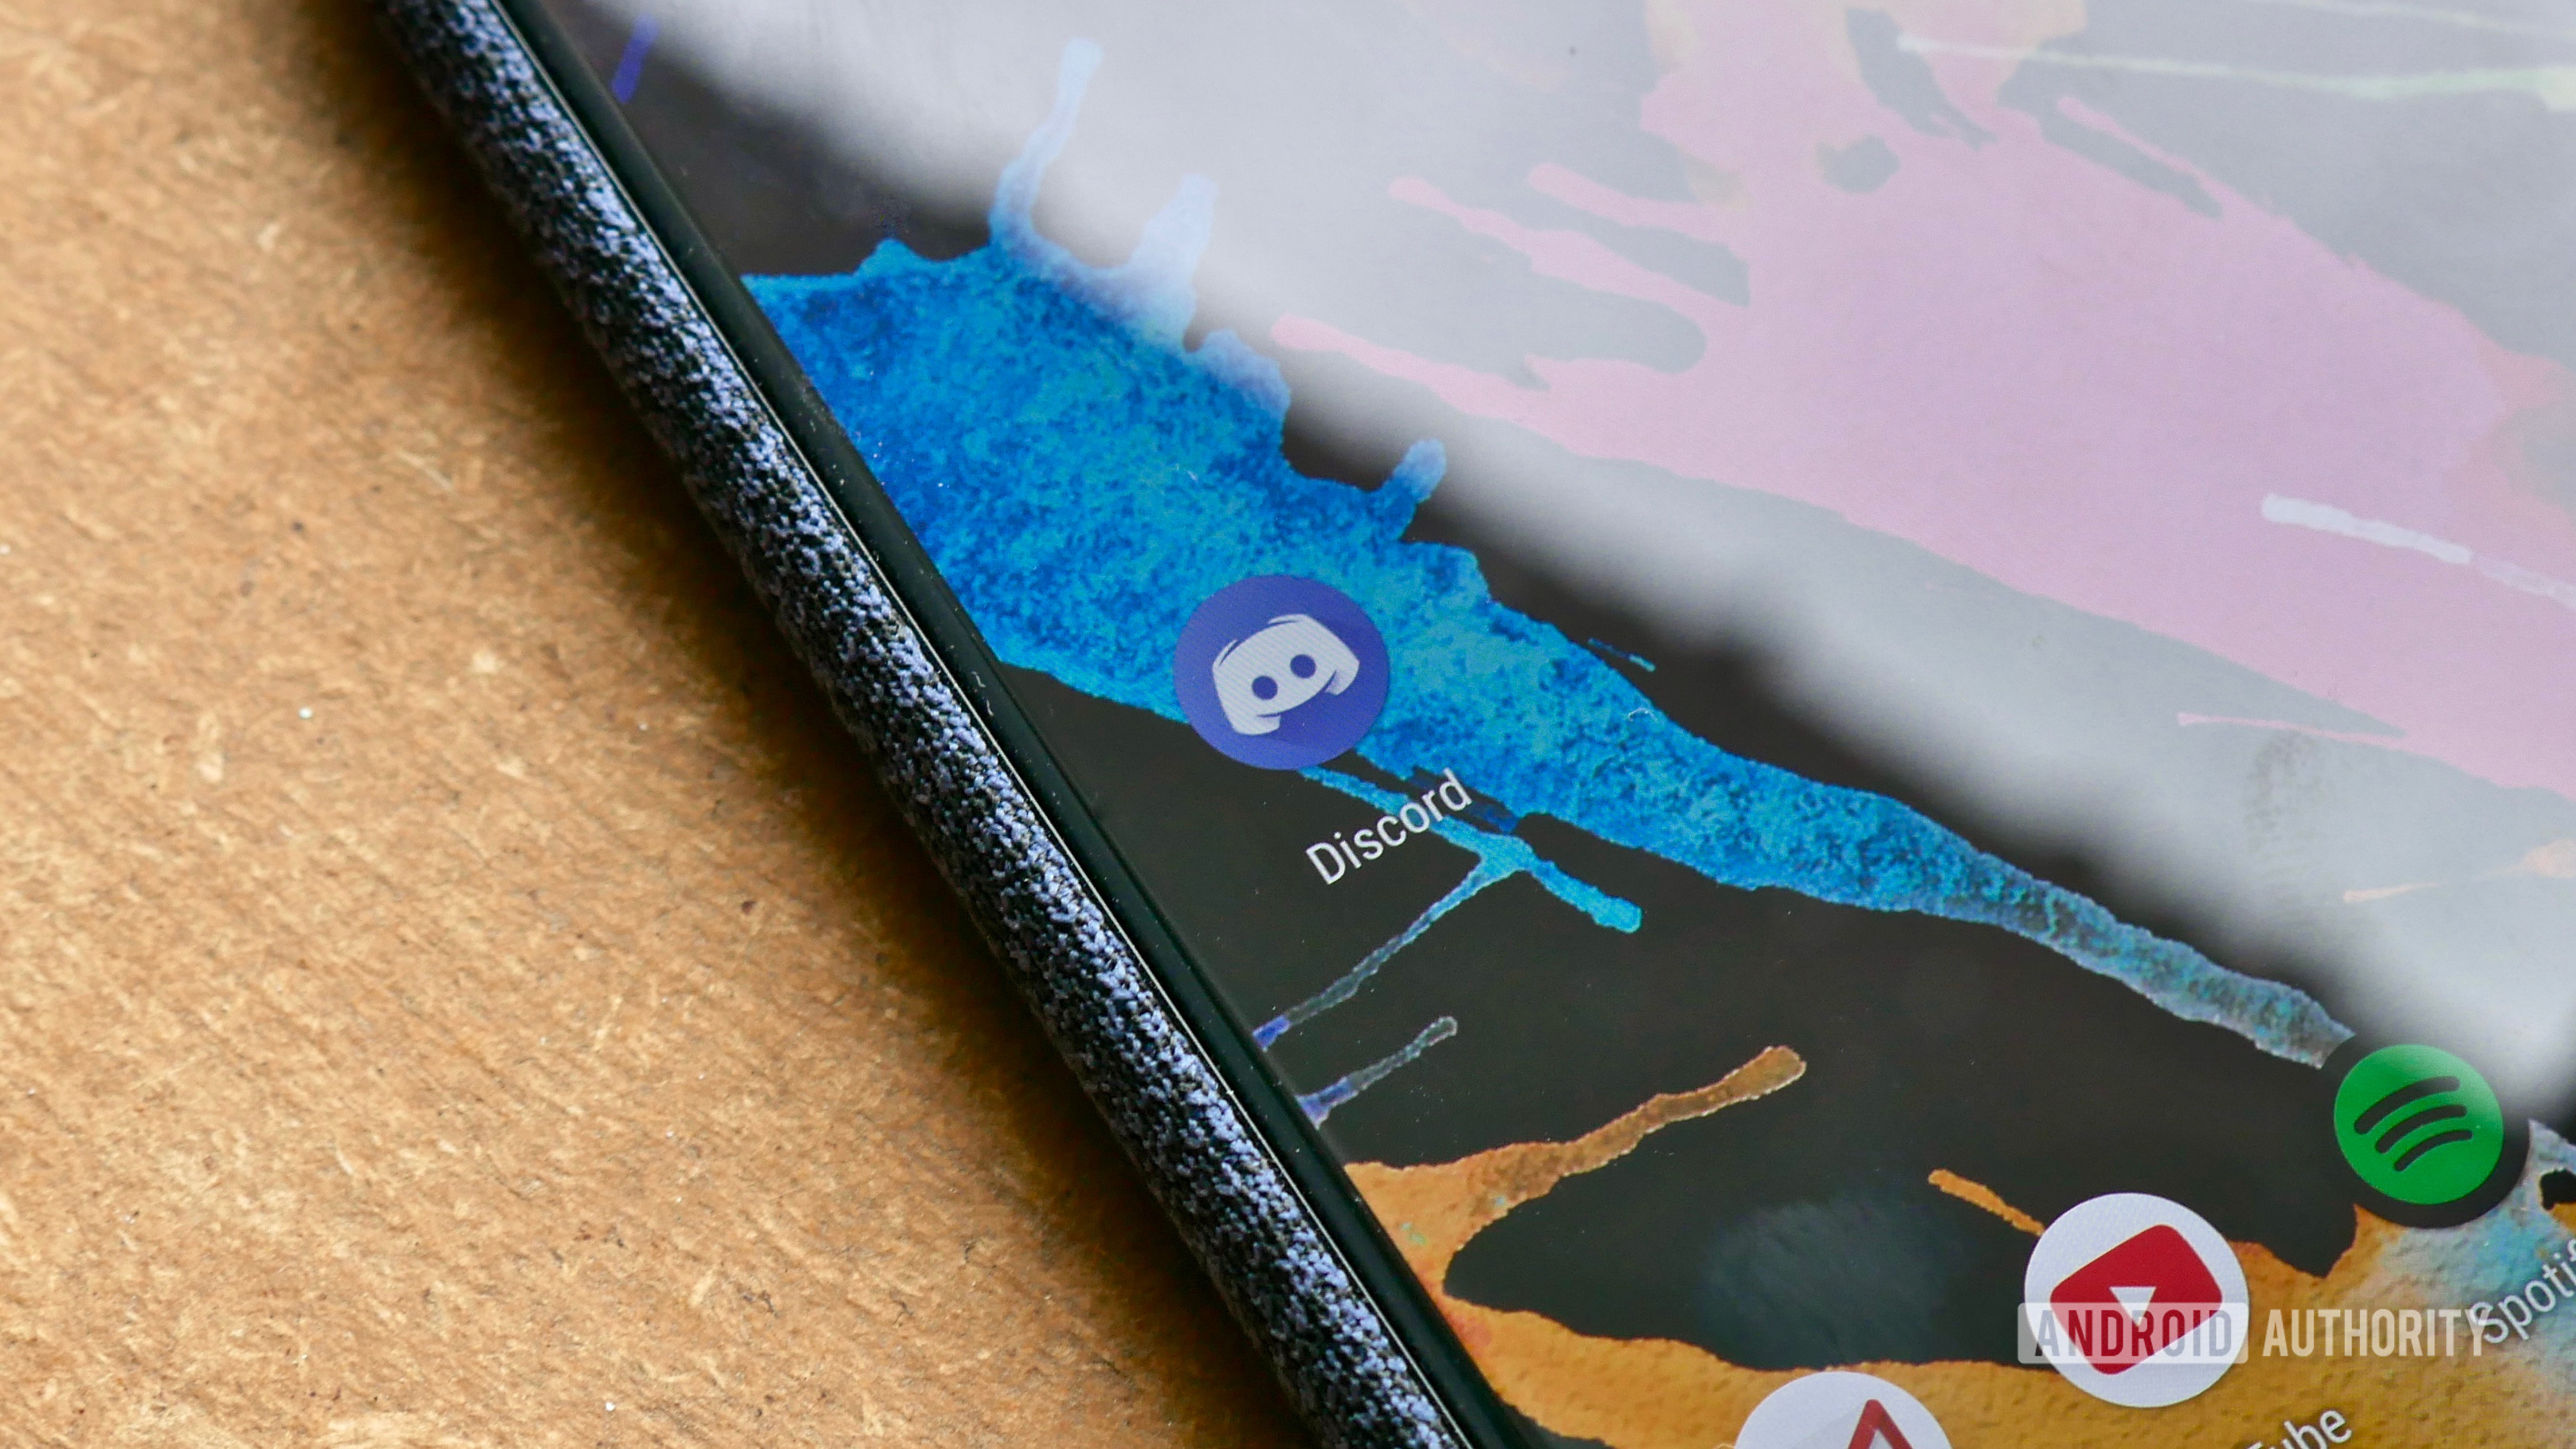 Discord app on a Google Pixel 3 XL Android smartphone